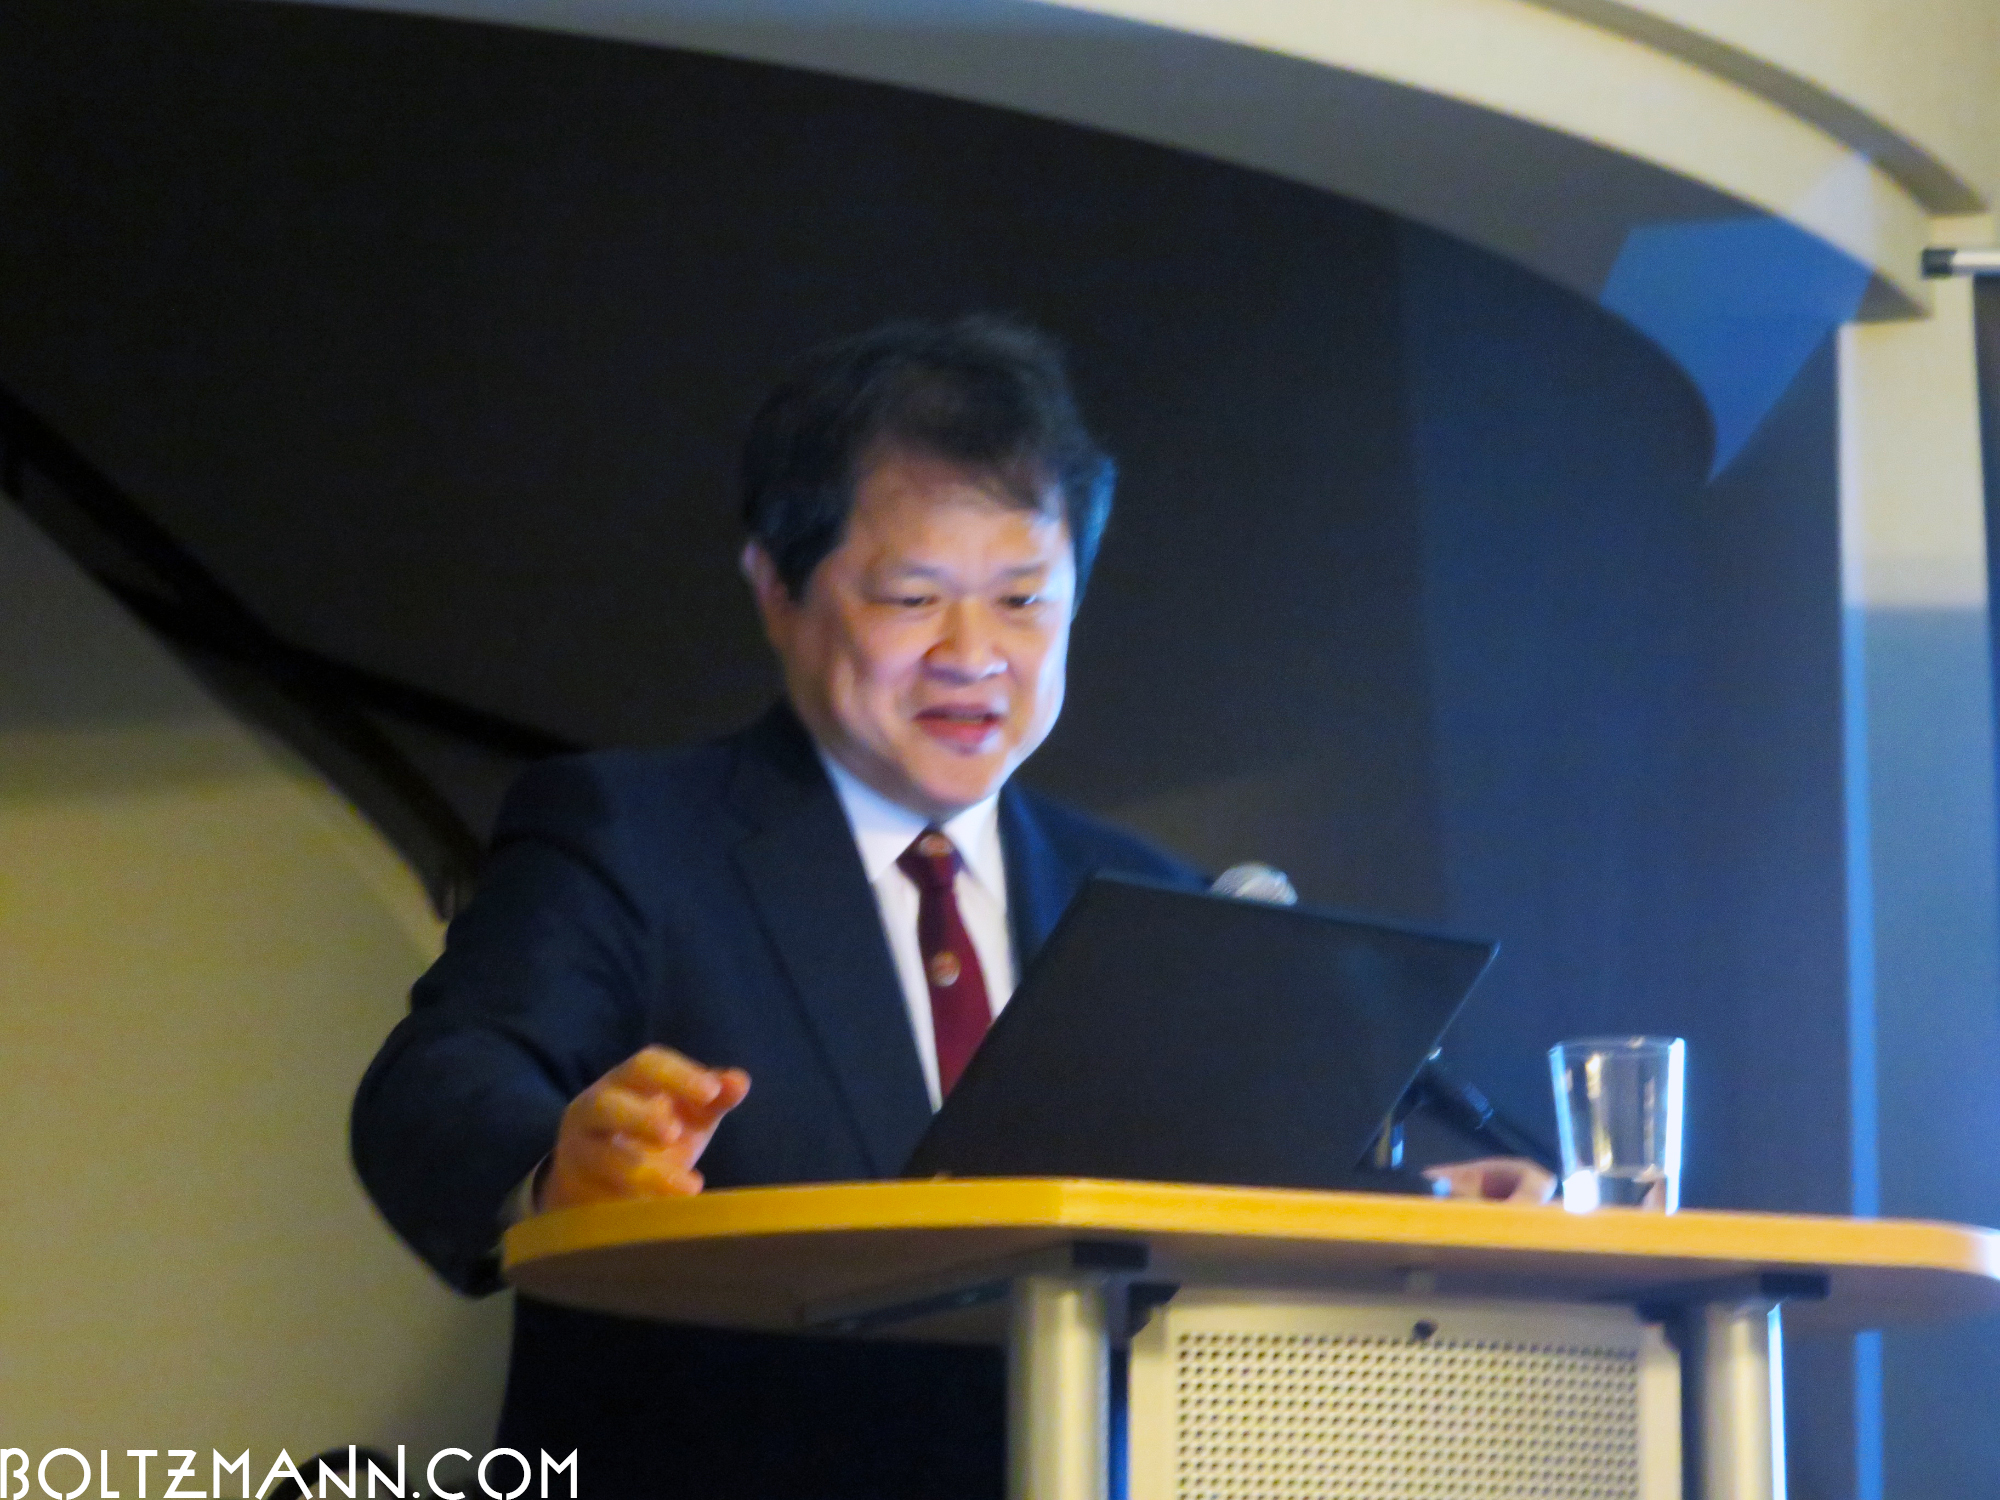 Makoto Suematsu: AMED Mission and perspectives to fast-track medical R&D